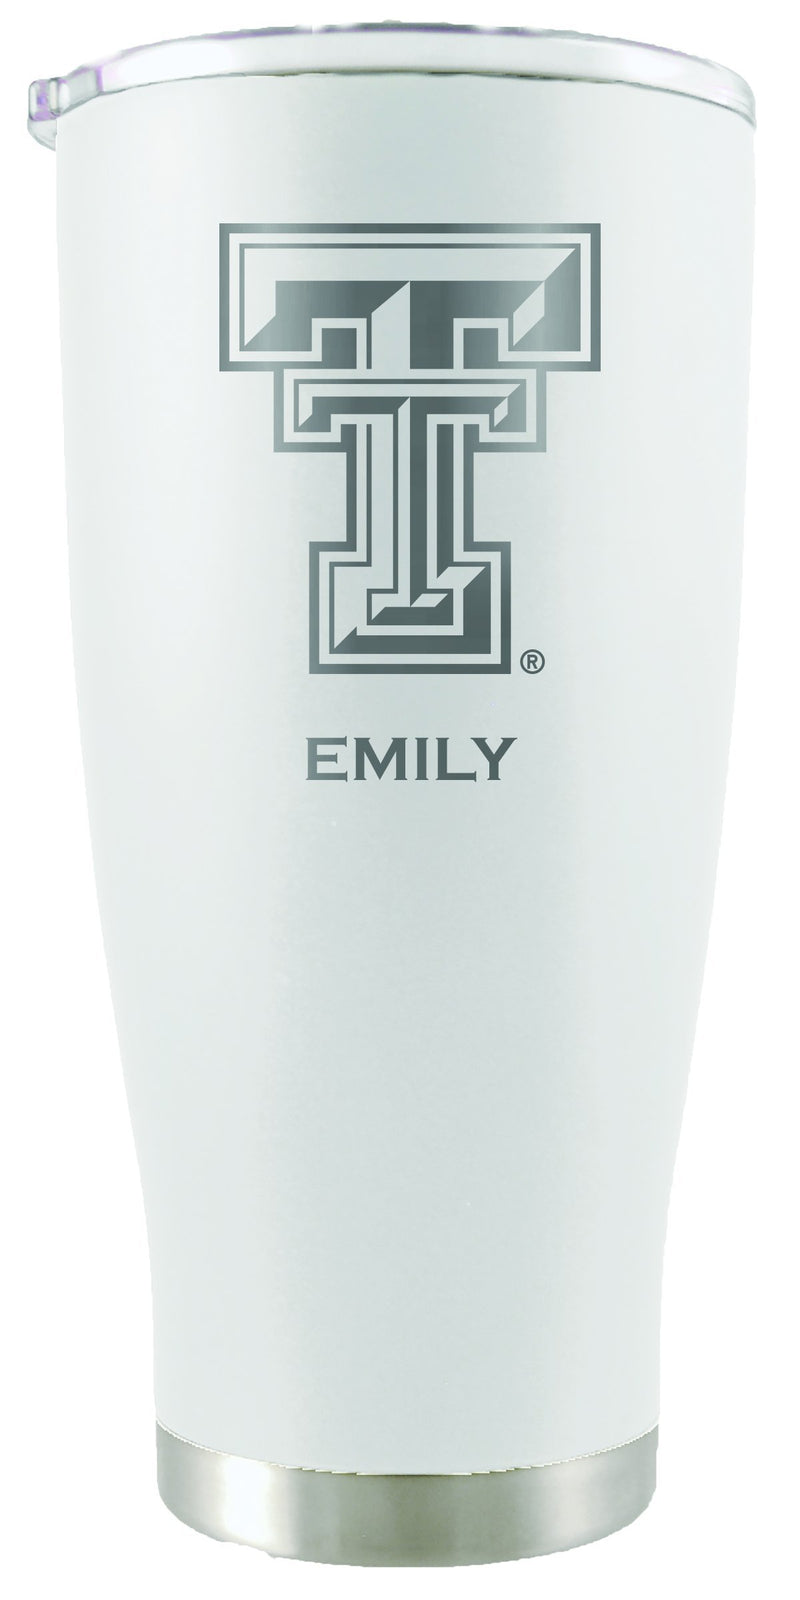 20oz White Personalized Stainless Steel Tumbler | Texas Tech
COL, CurrentProduct, Drinkware_category_All, Personalized_Personalized, Texas Tech Red Raiders, TXT
The Memory Company